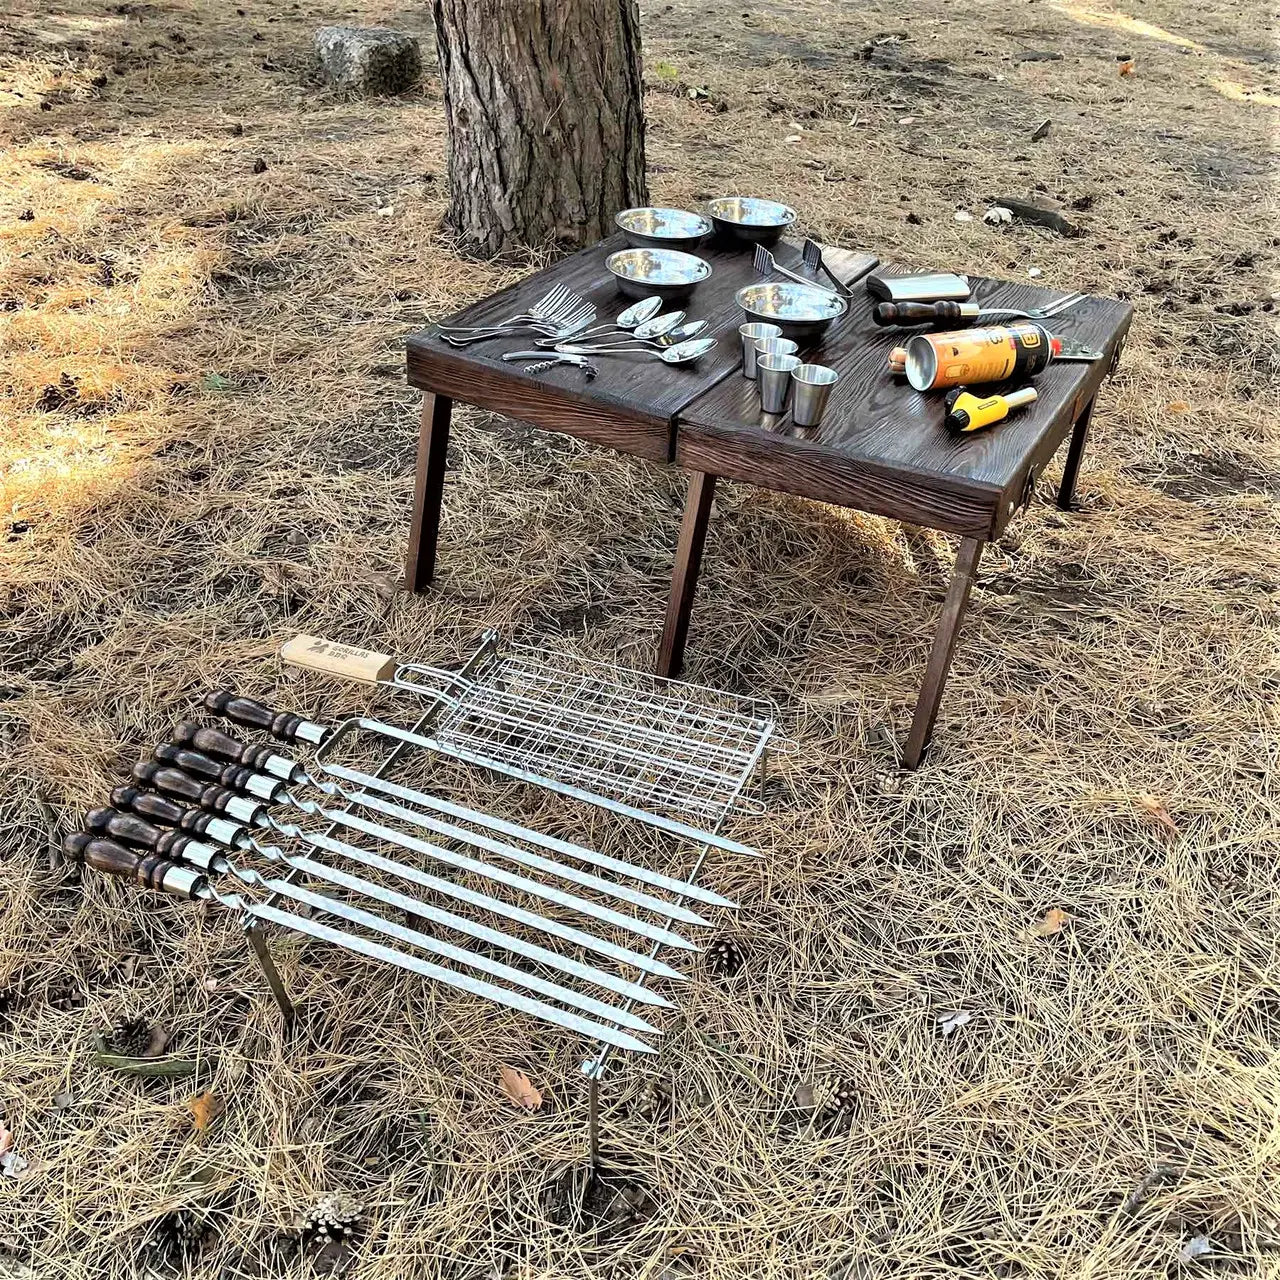 BBQ Tools Set - Grilling Accessories – Skewers Set "Chameleon"- BBQ Grills and Accessories in a Wooden Case Table, 34 items